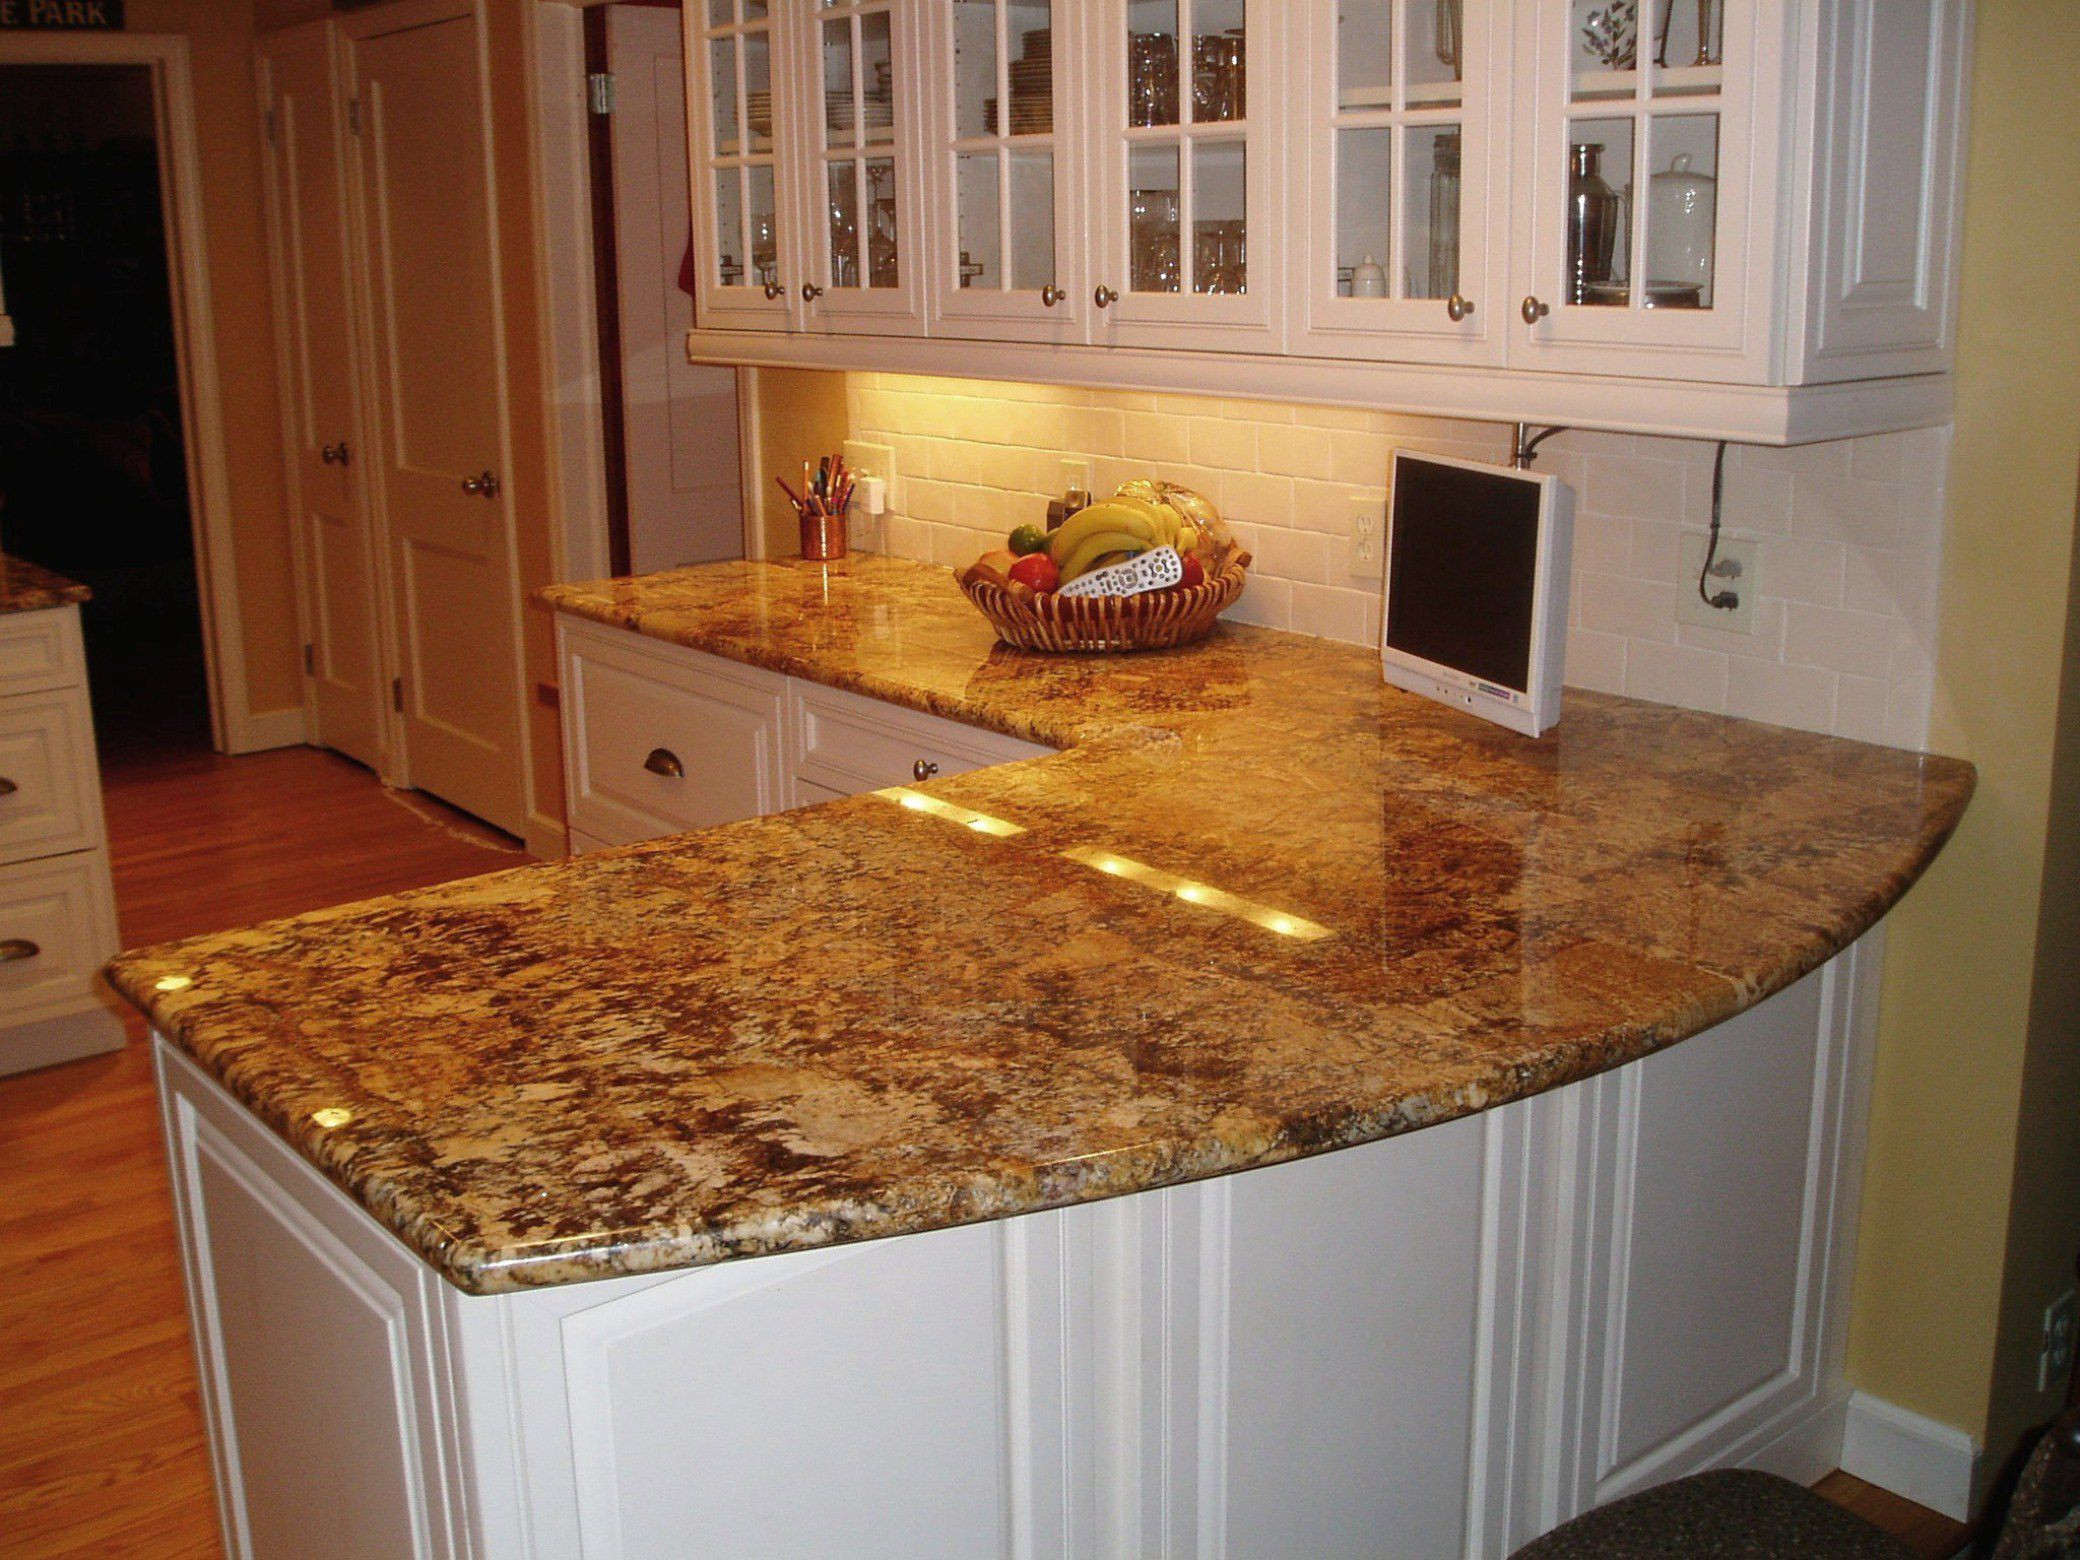 Types Of Tiles For Kitchen
 Choosing the Right Types of Kitchen Countertops Amaza Design